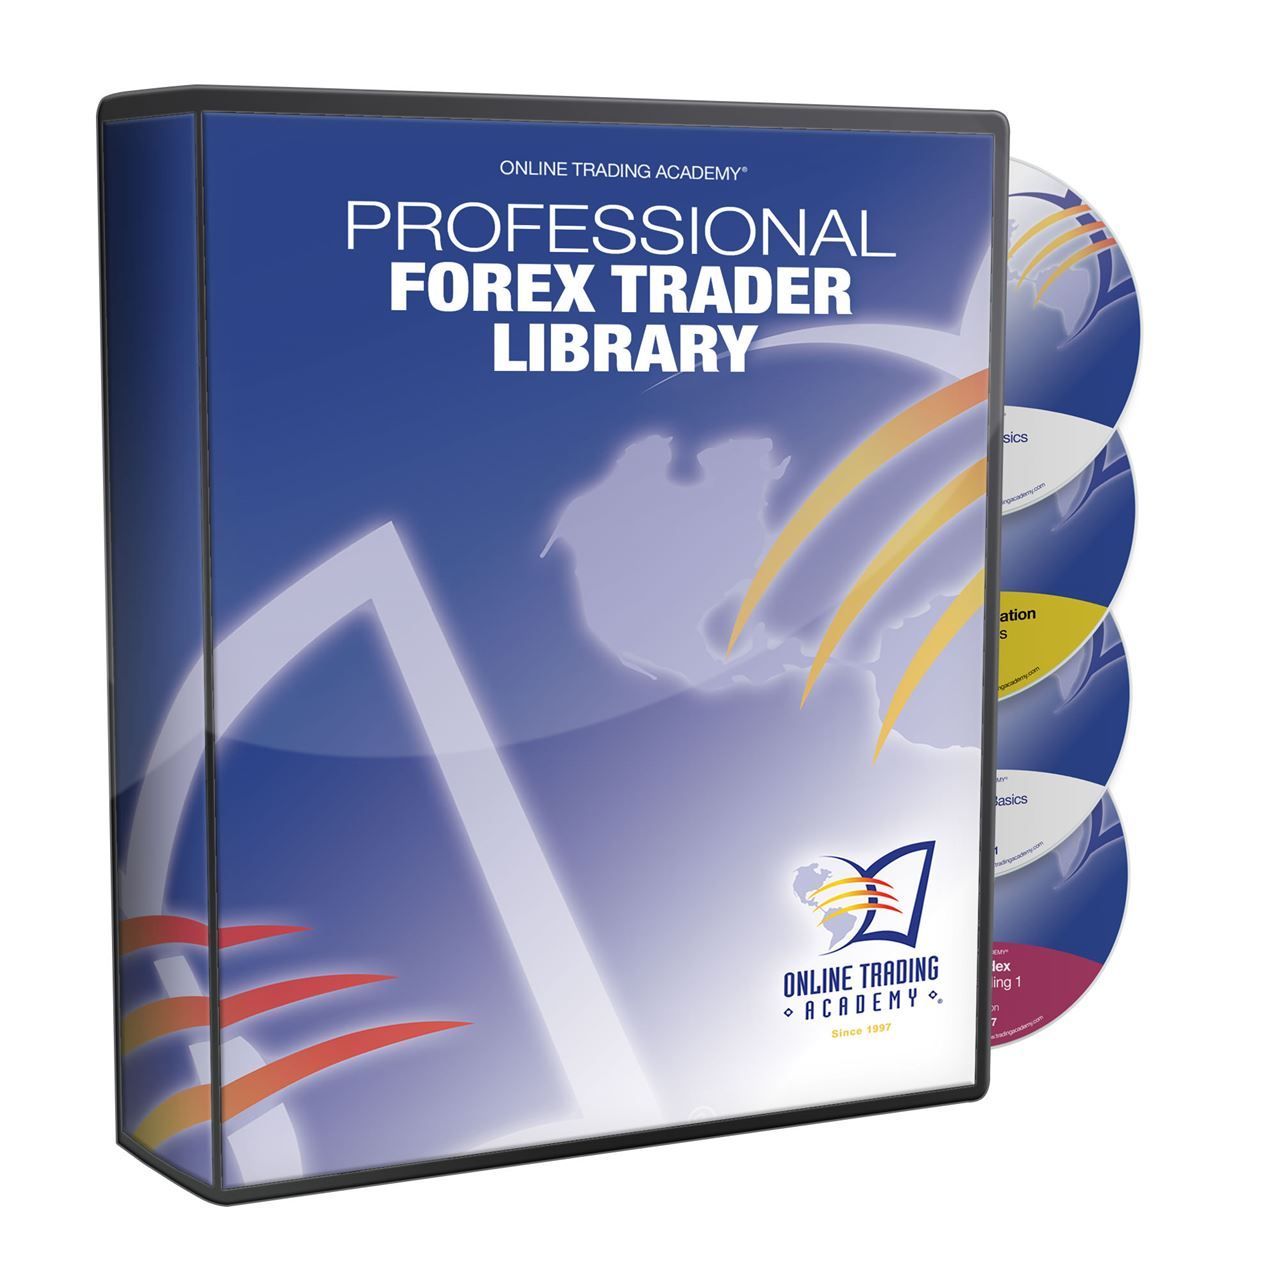 professional forex trader library torrent